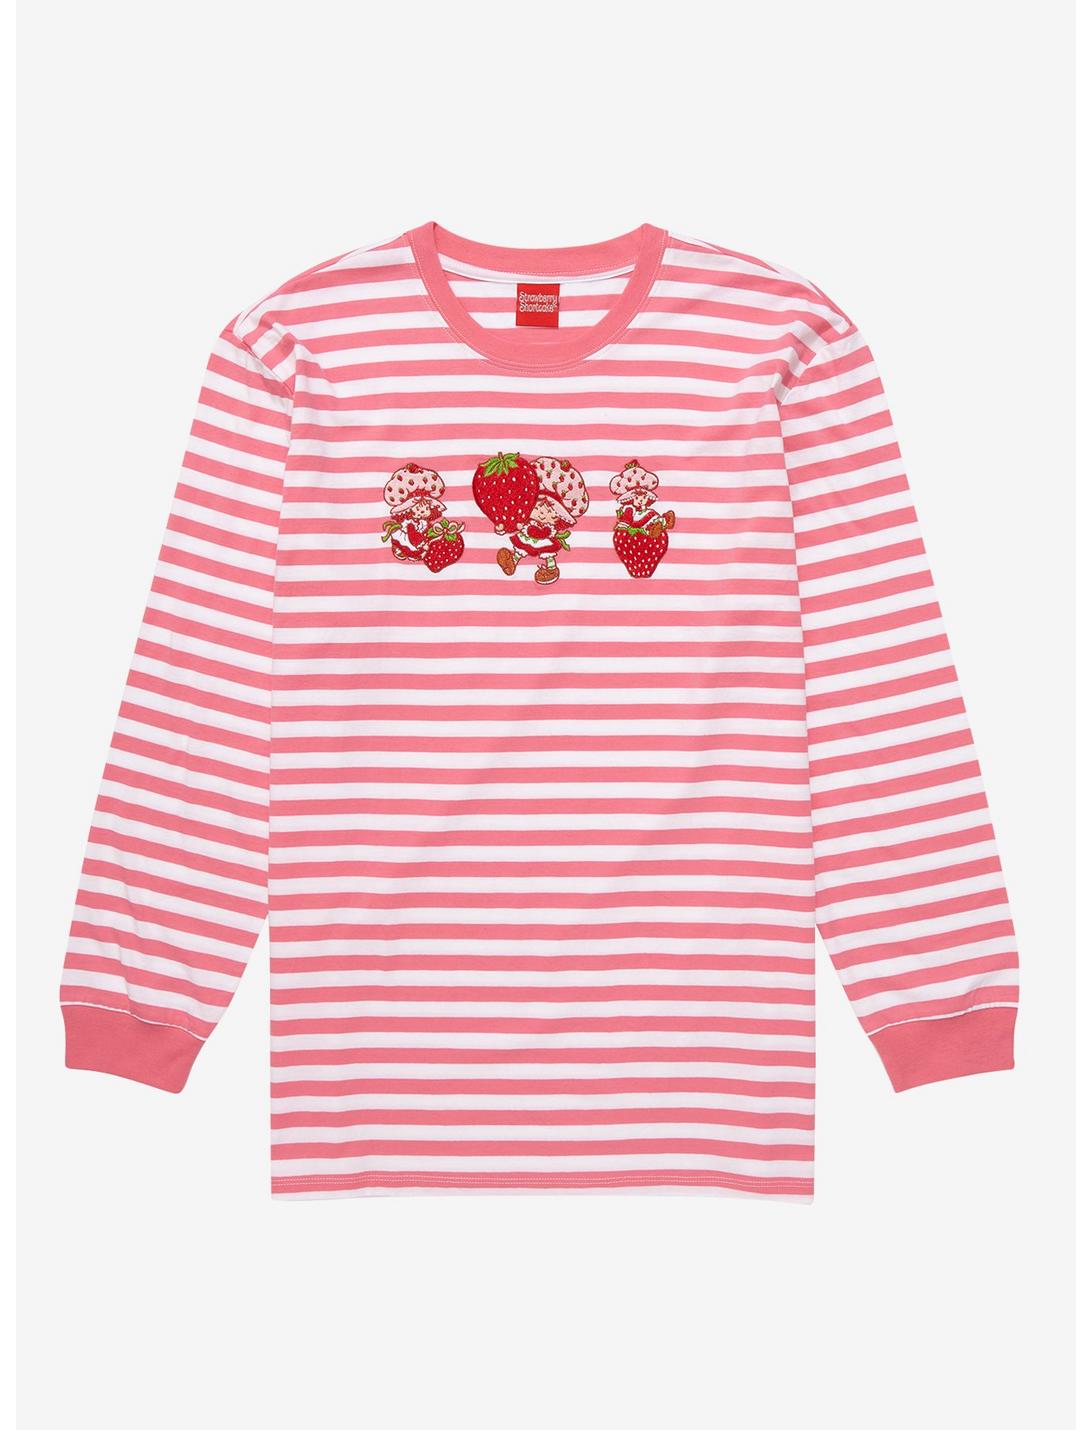 Strawberry Shortcake Strawberry Striped Long Sleeve T-Shirt - BoxLunch Exclusive, MULTI, hi-res